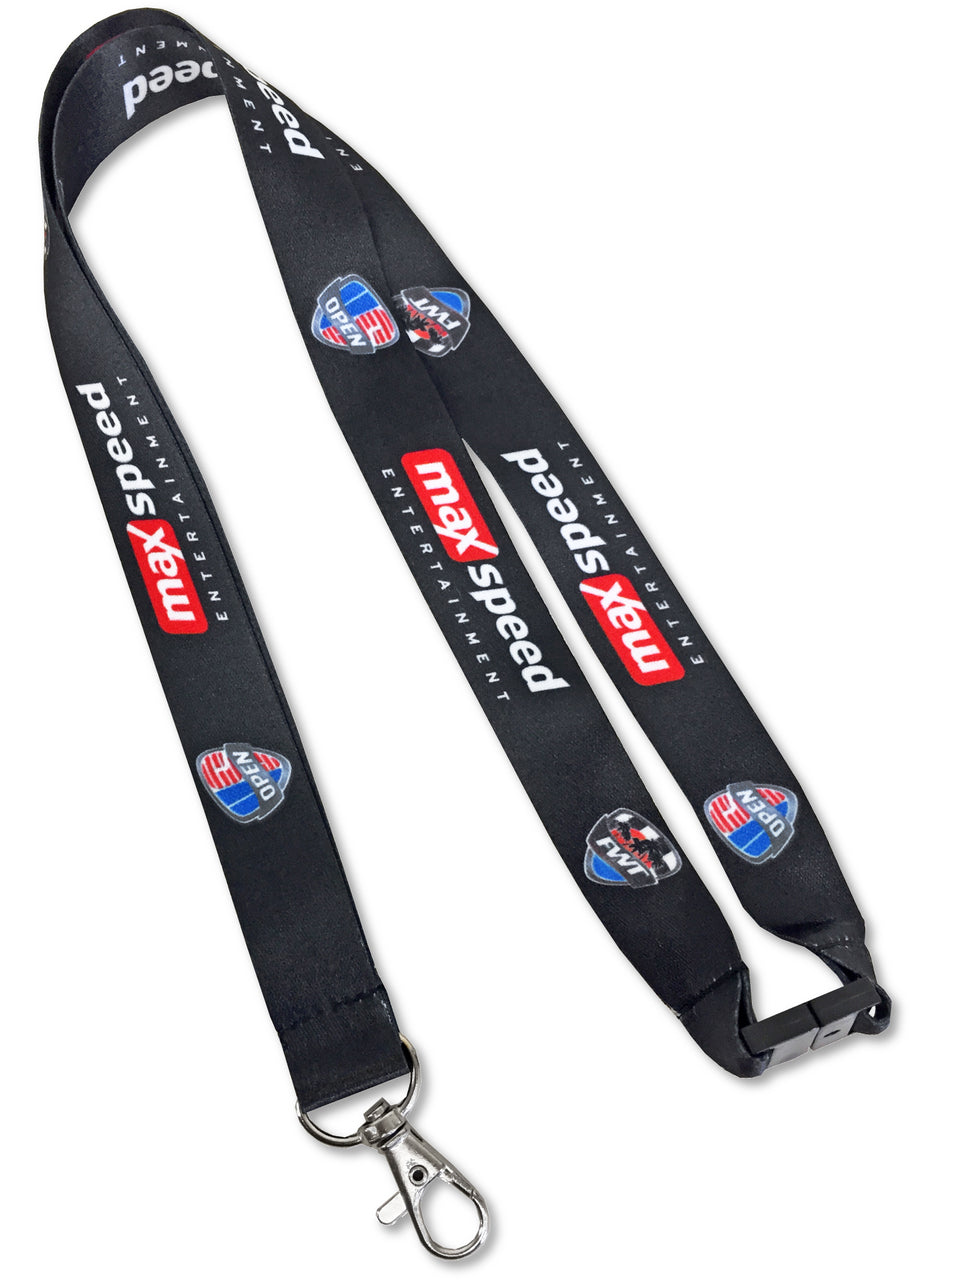 RSLYD-SB - Recycled Sublimated Full Color PET Eco-friendly Lanyard Safety Breakaway